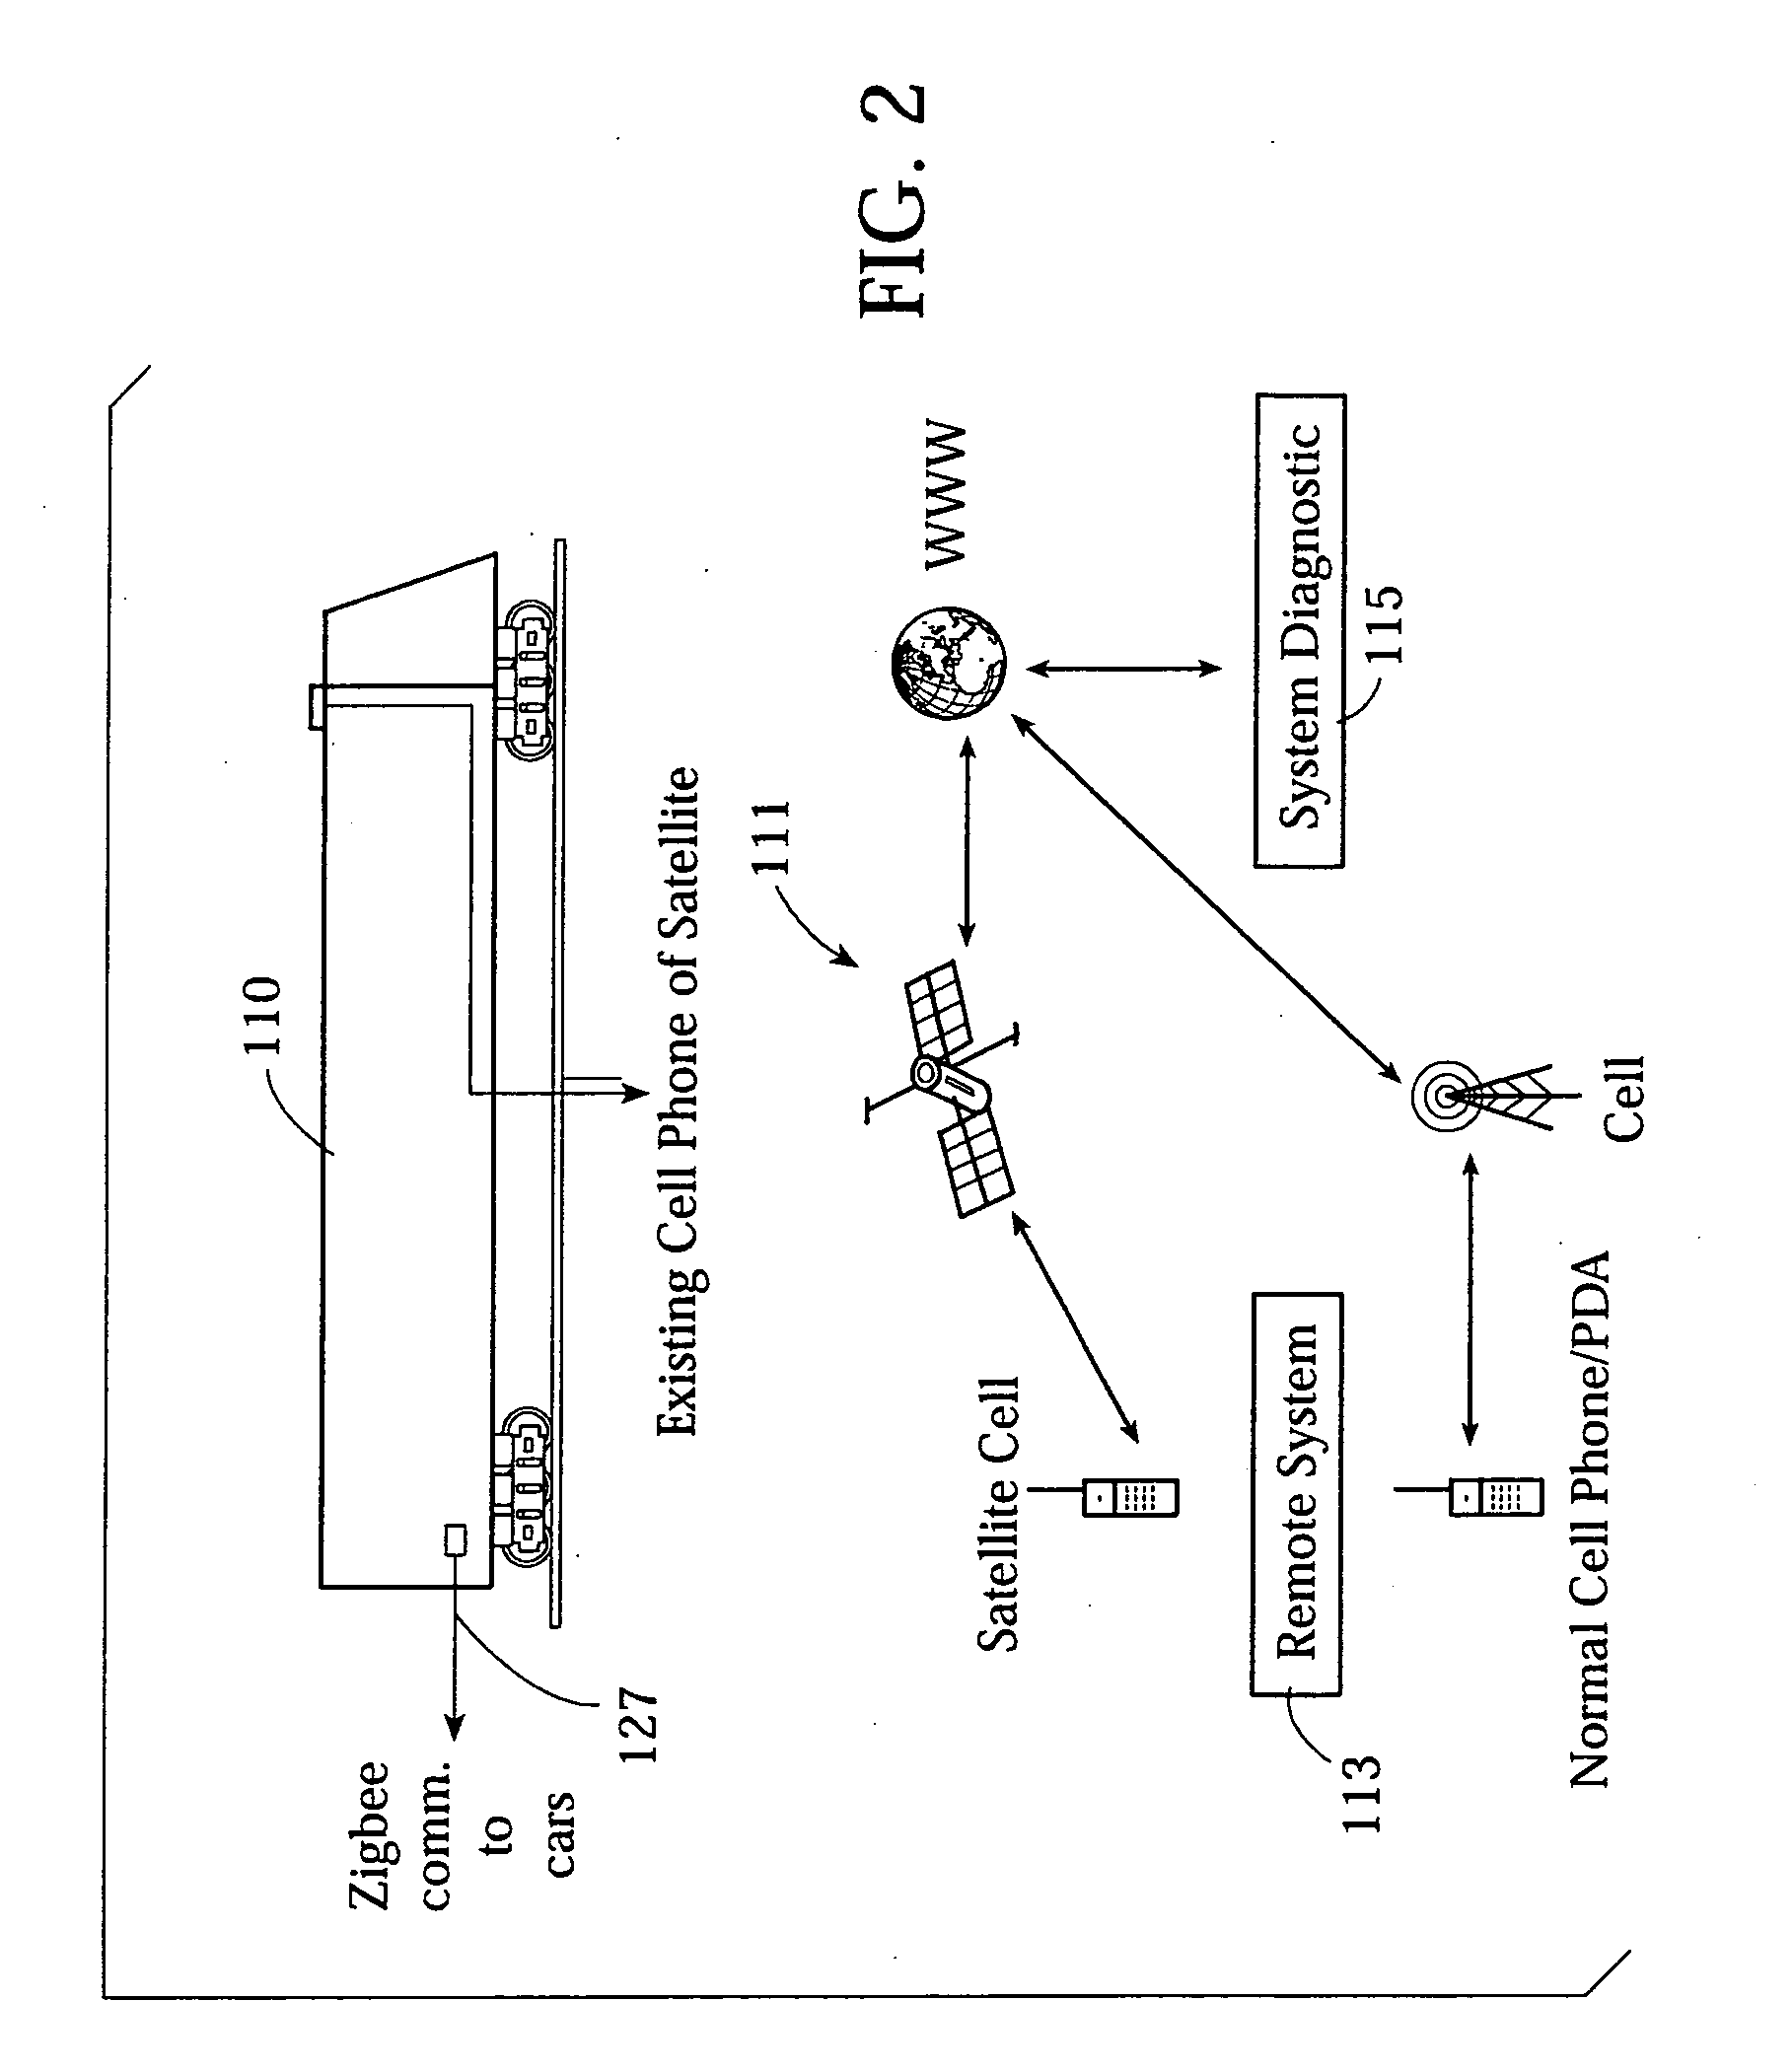 Self-assembling wireless network, vehicle communications system, railroad wheel and bearing monitoring system and methods therefor